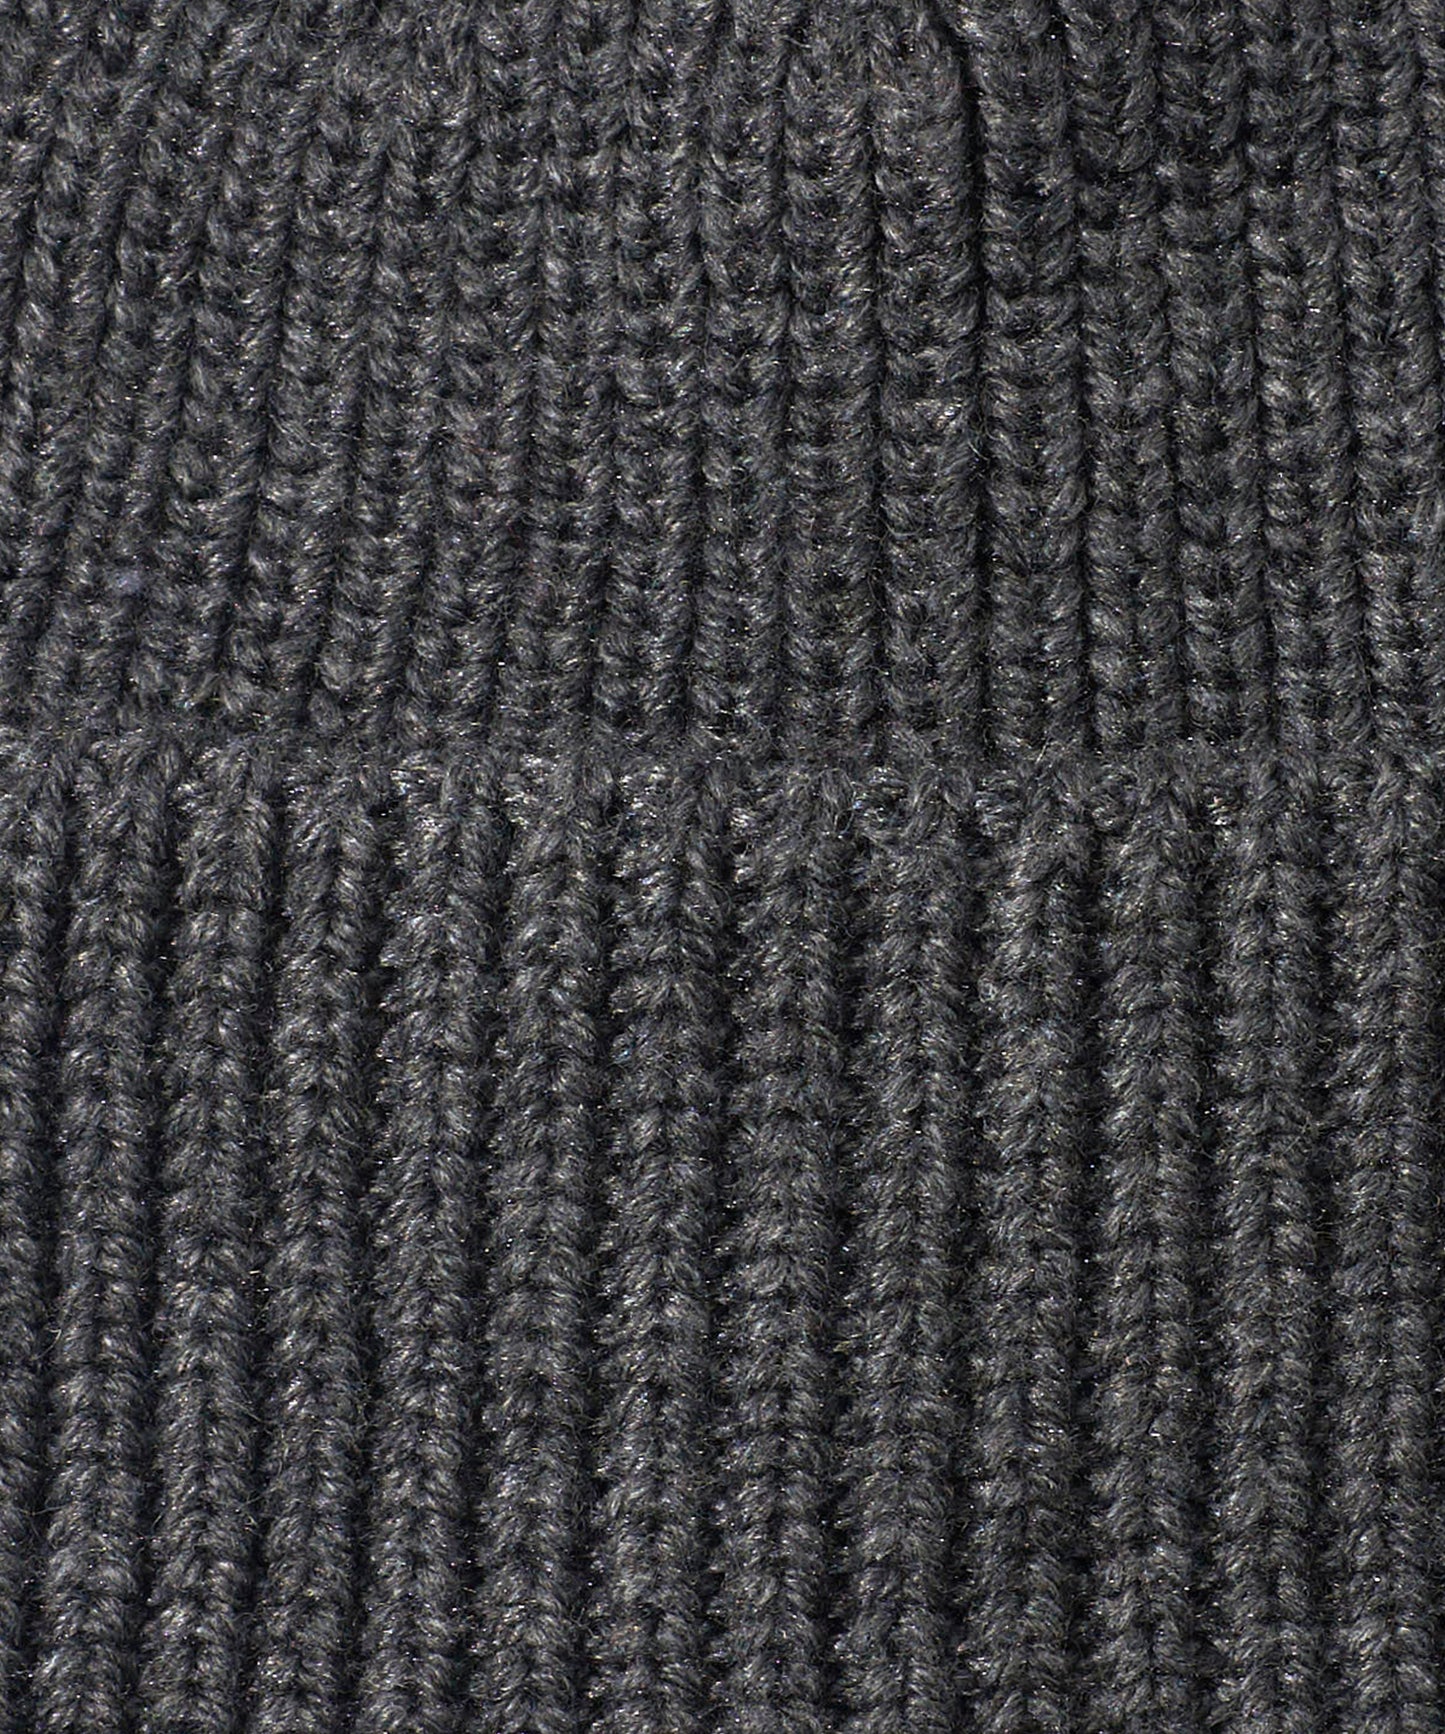 Perfect Ribbed Beanie in color Charcoal